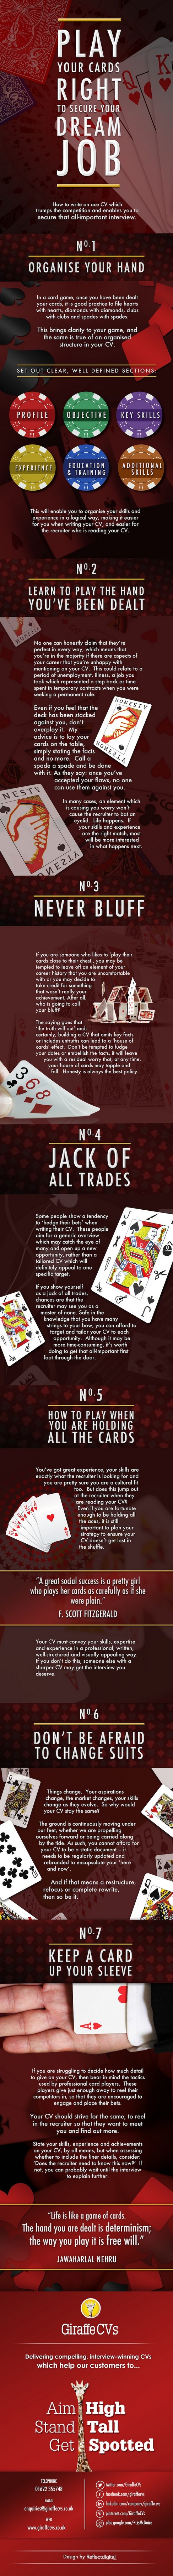 How Playing Your Cards Right Can Get You Your Dream Job